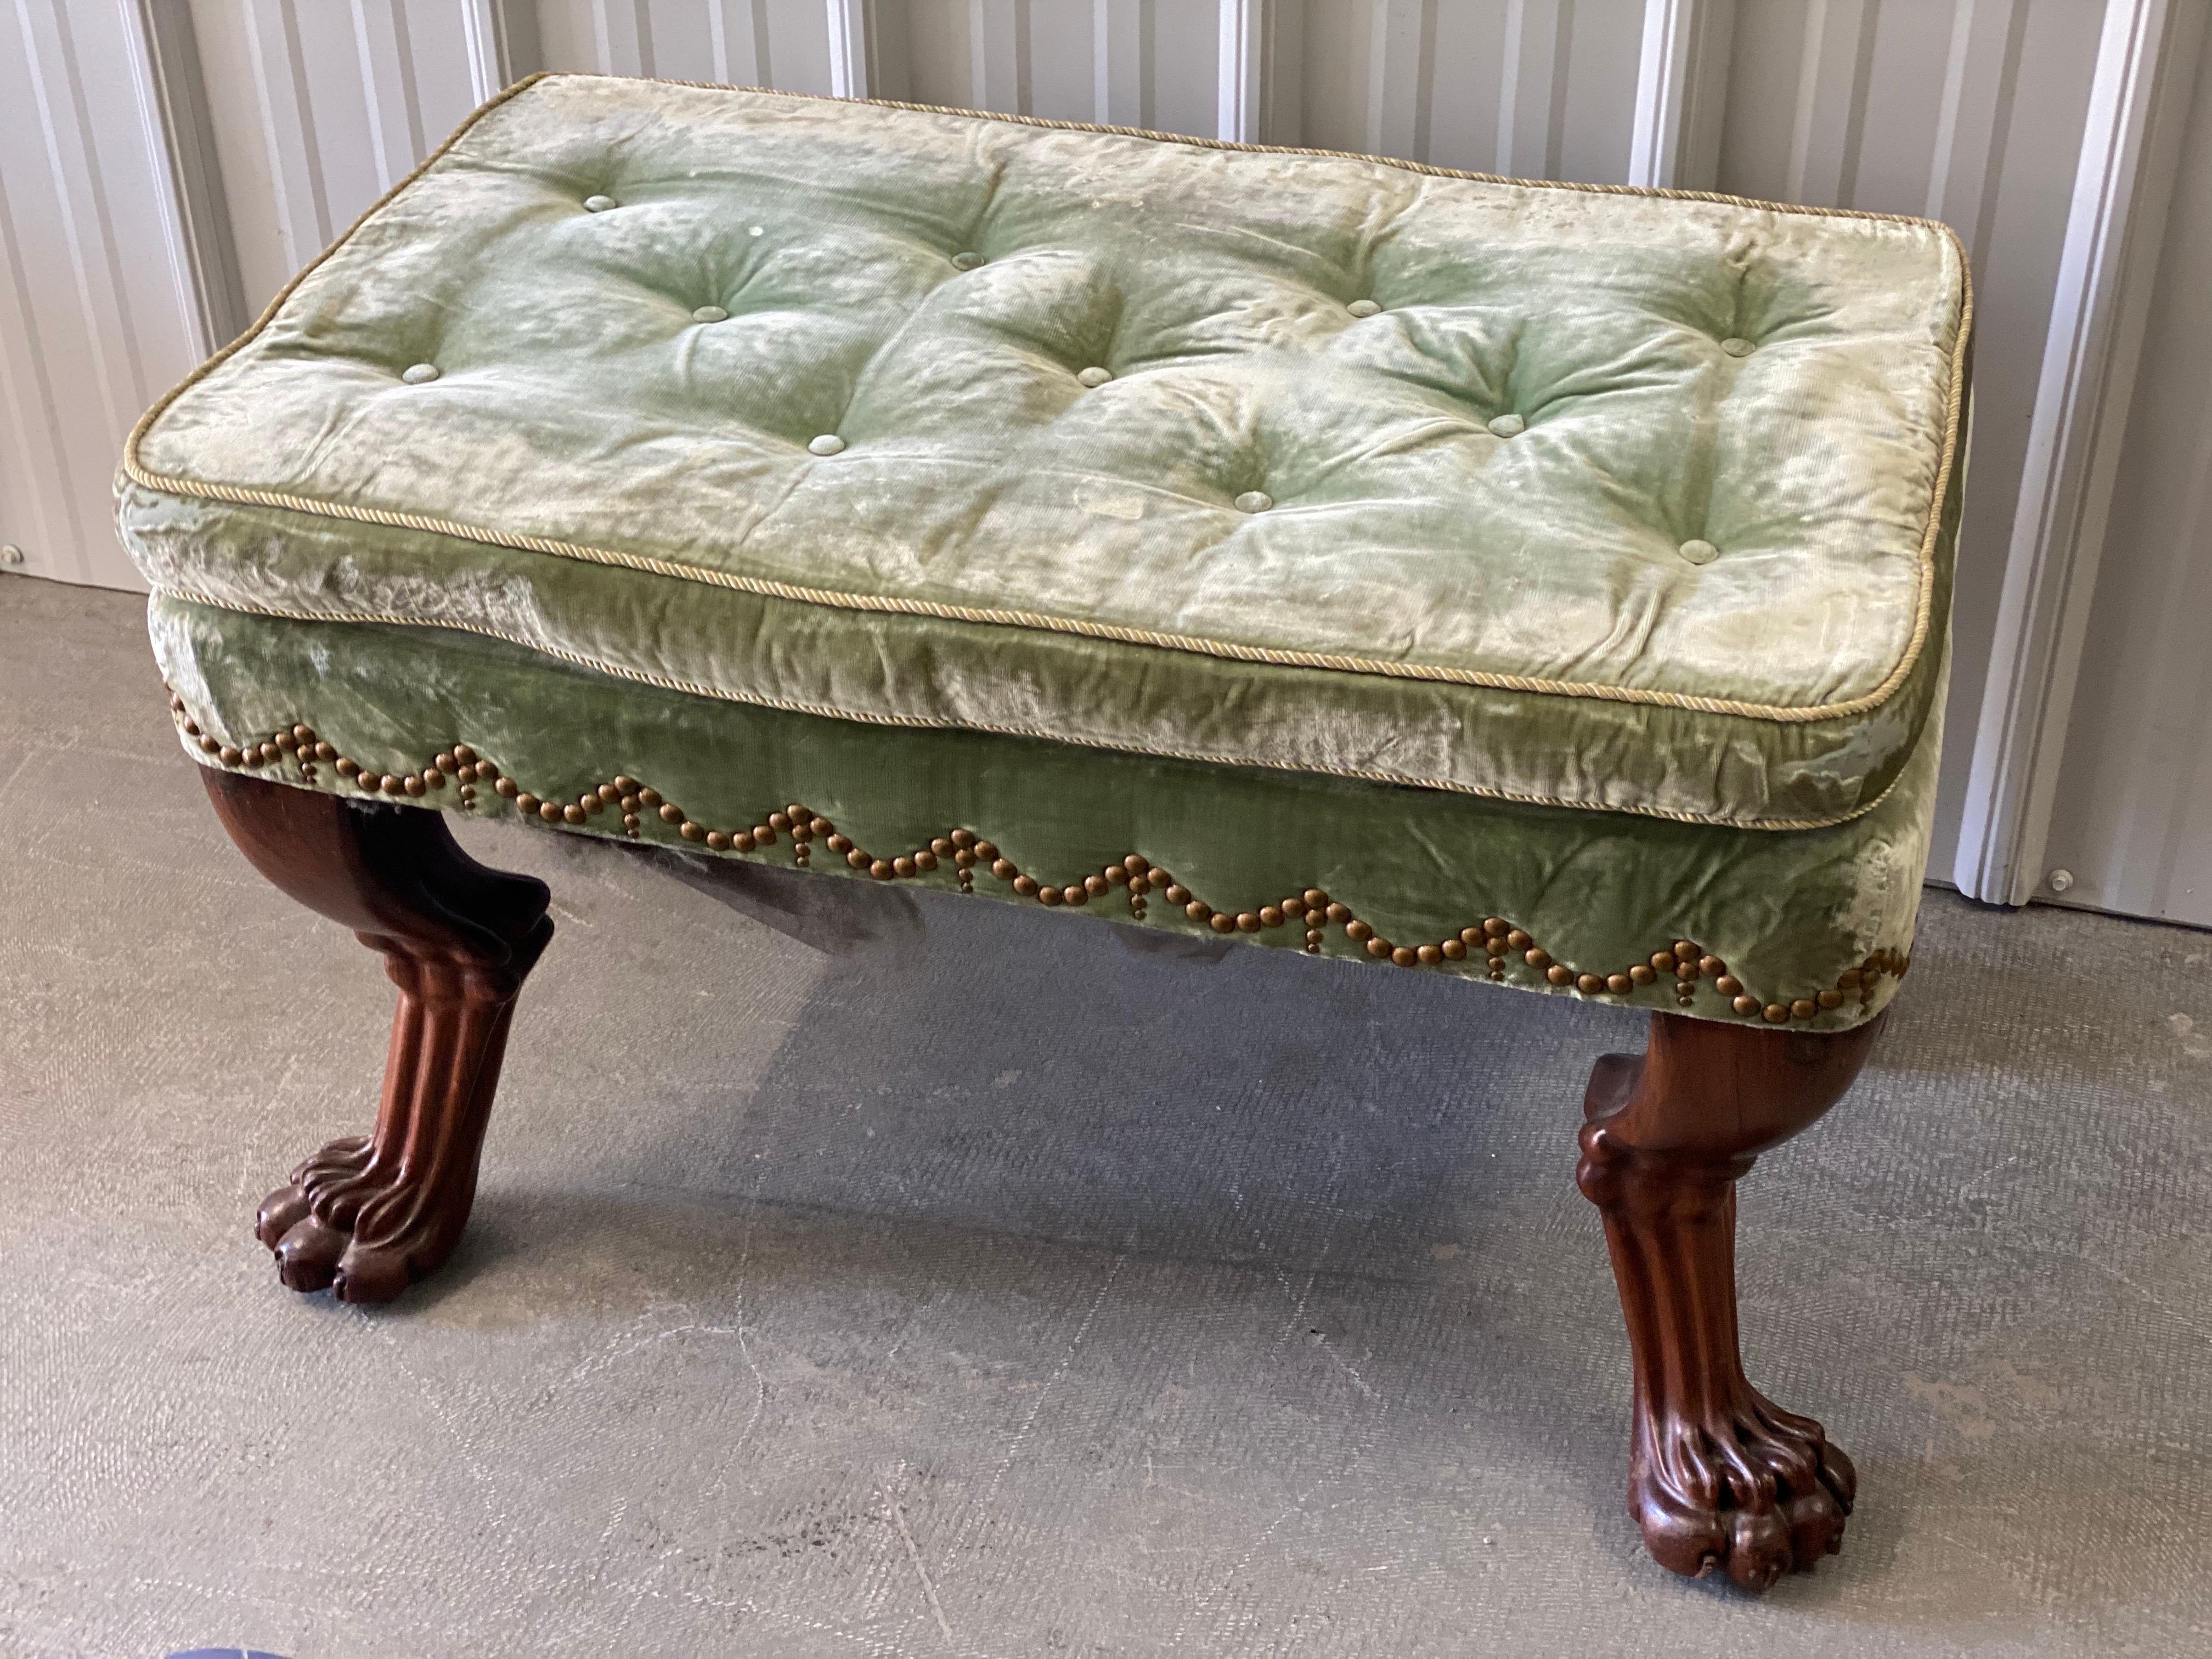 18th Century English Mahogany Clawfoot Stool in Velvet with Nailheads For Sale 1